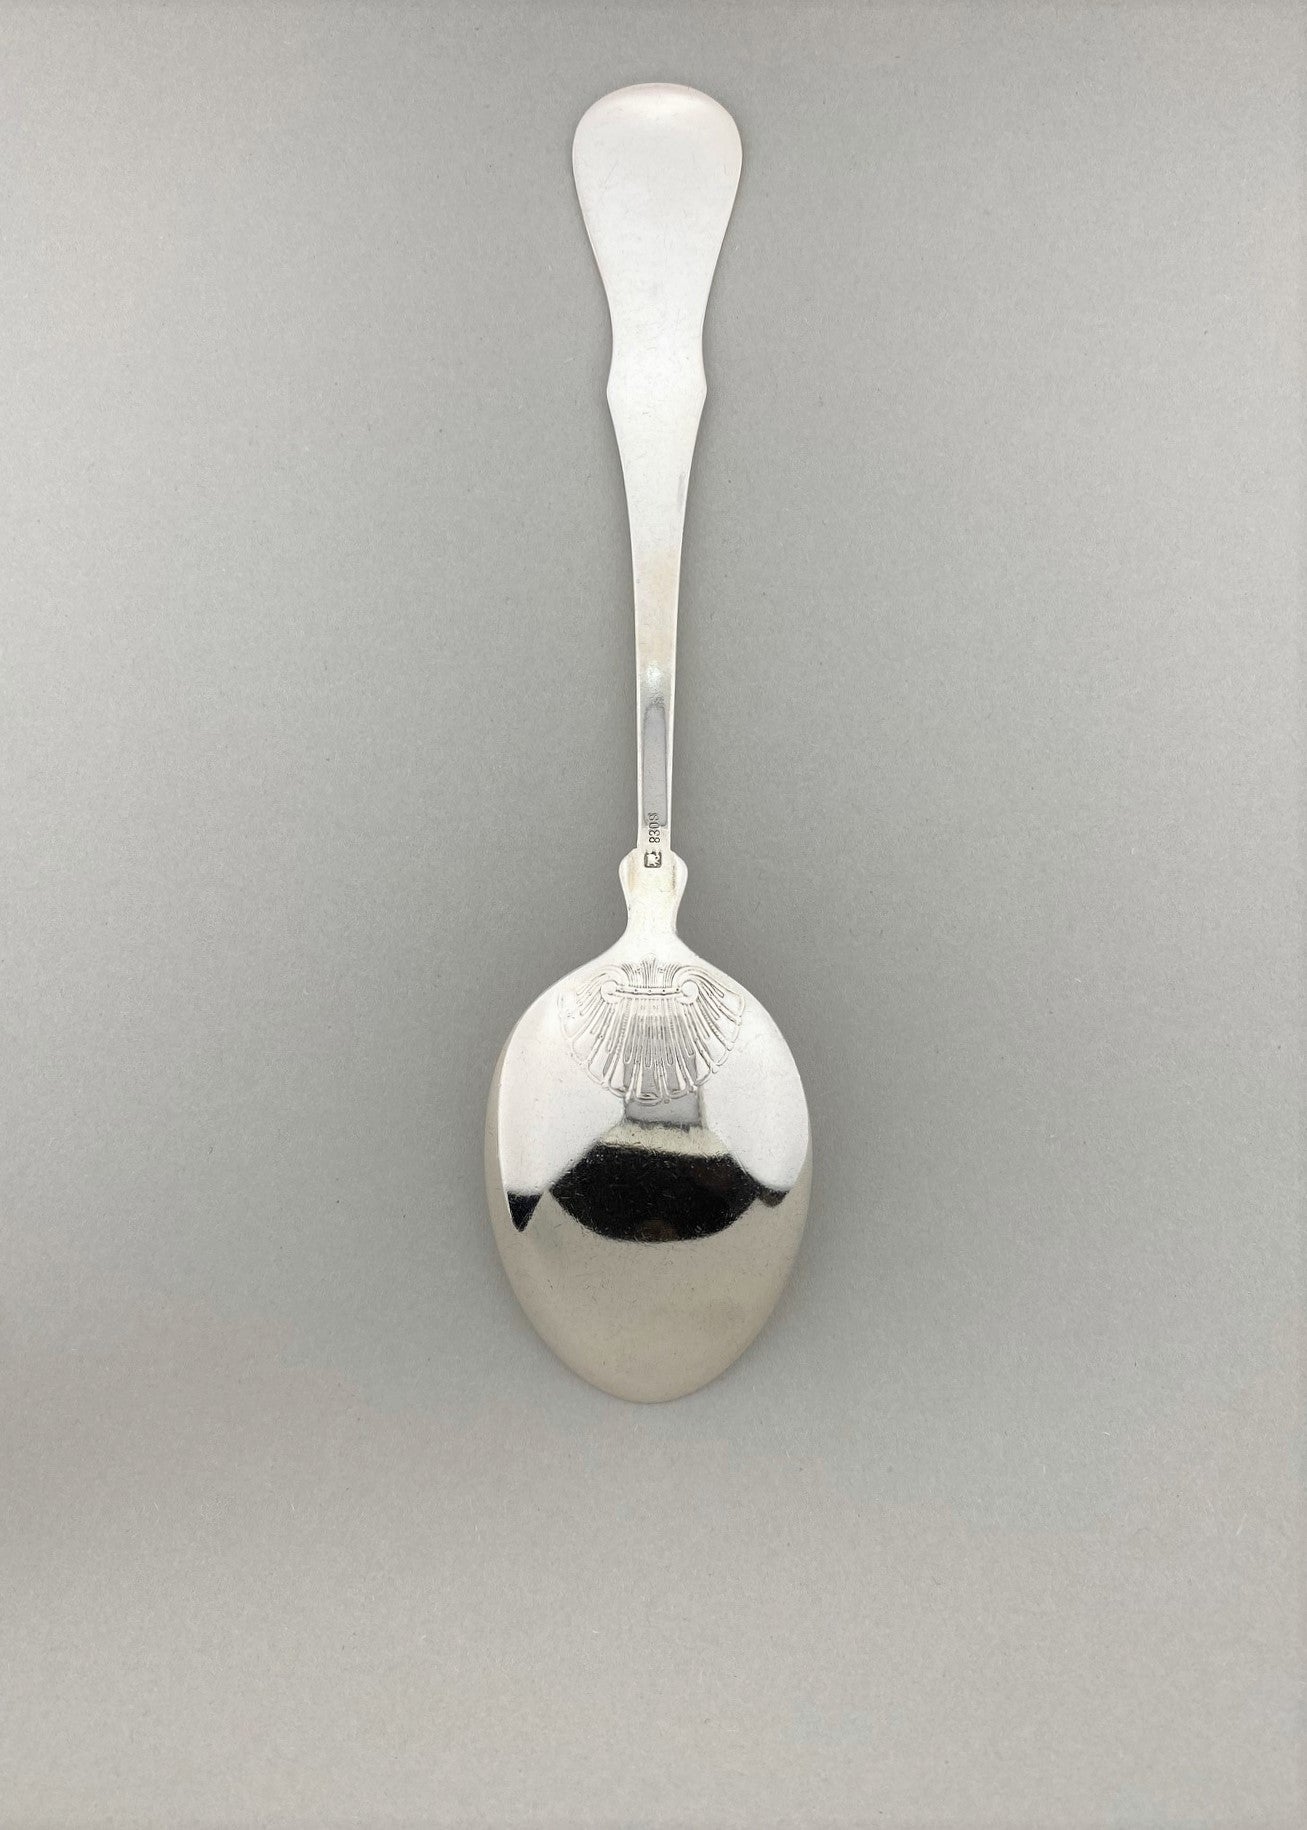 Vintage Queen's tablespoon small